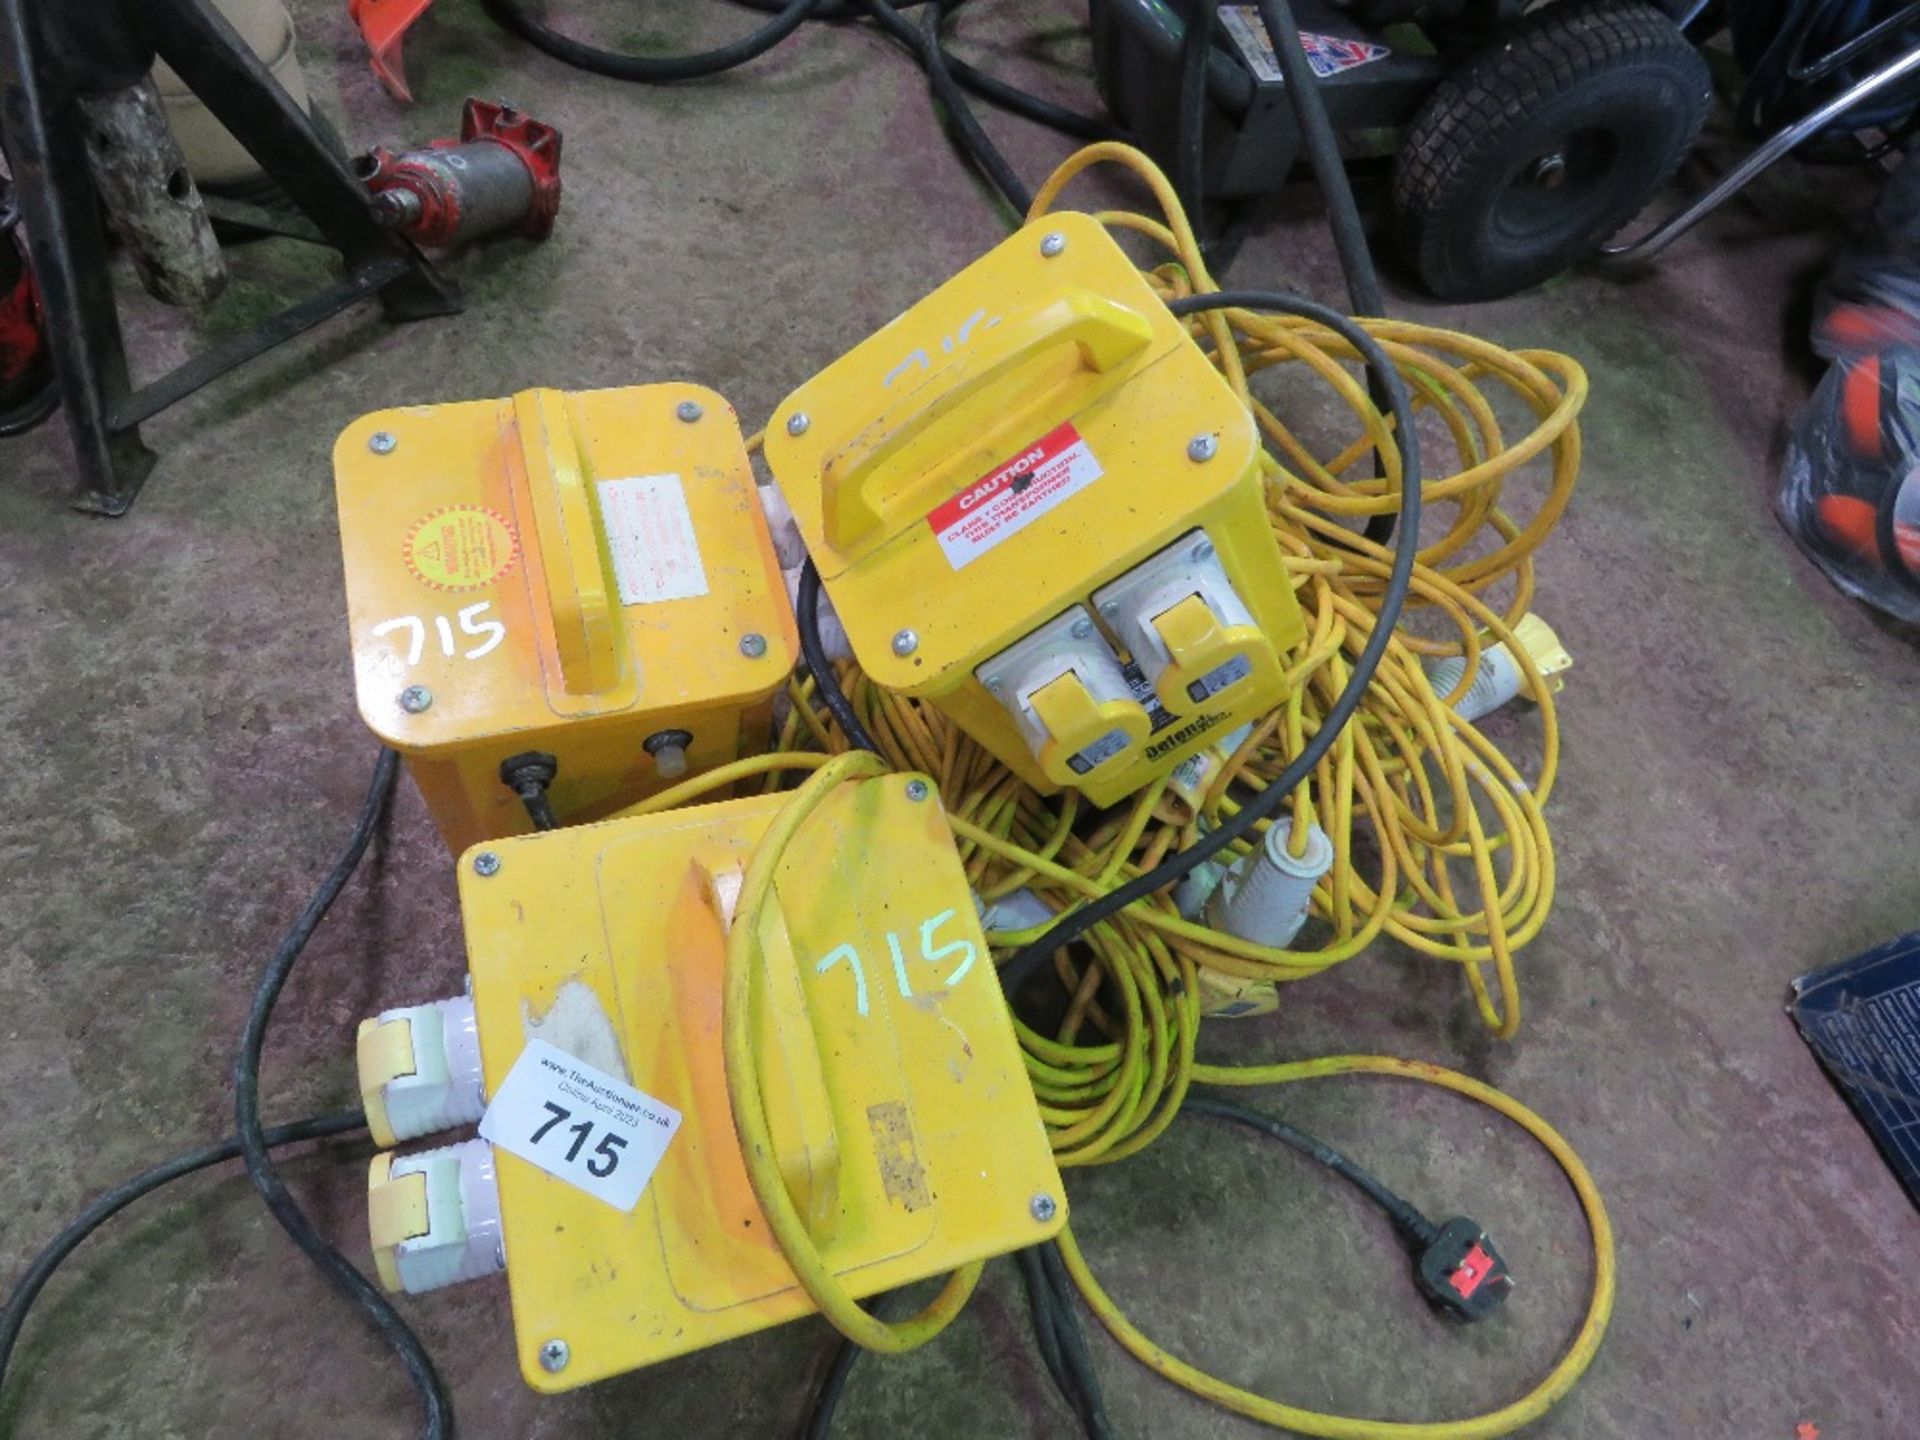 3 X 110VOLT TRANSFORMERS PLUS EXTENSION LEADS. THIS LOT IS SOLD UNDER THE AUCTIONEERS MARGIN SCHE